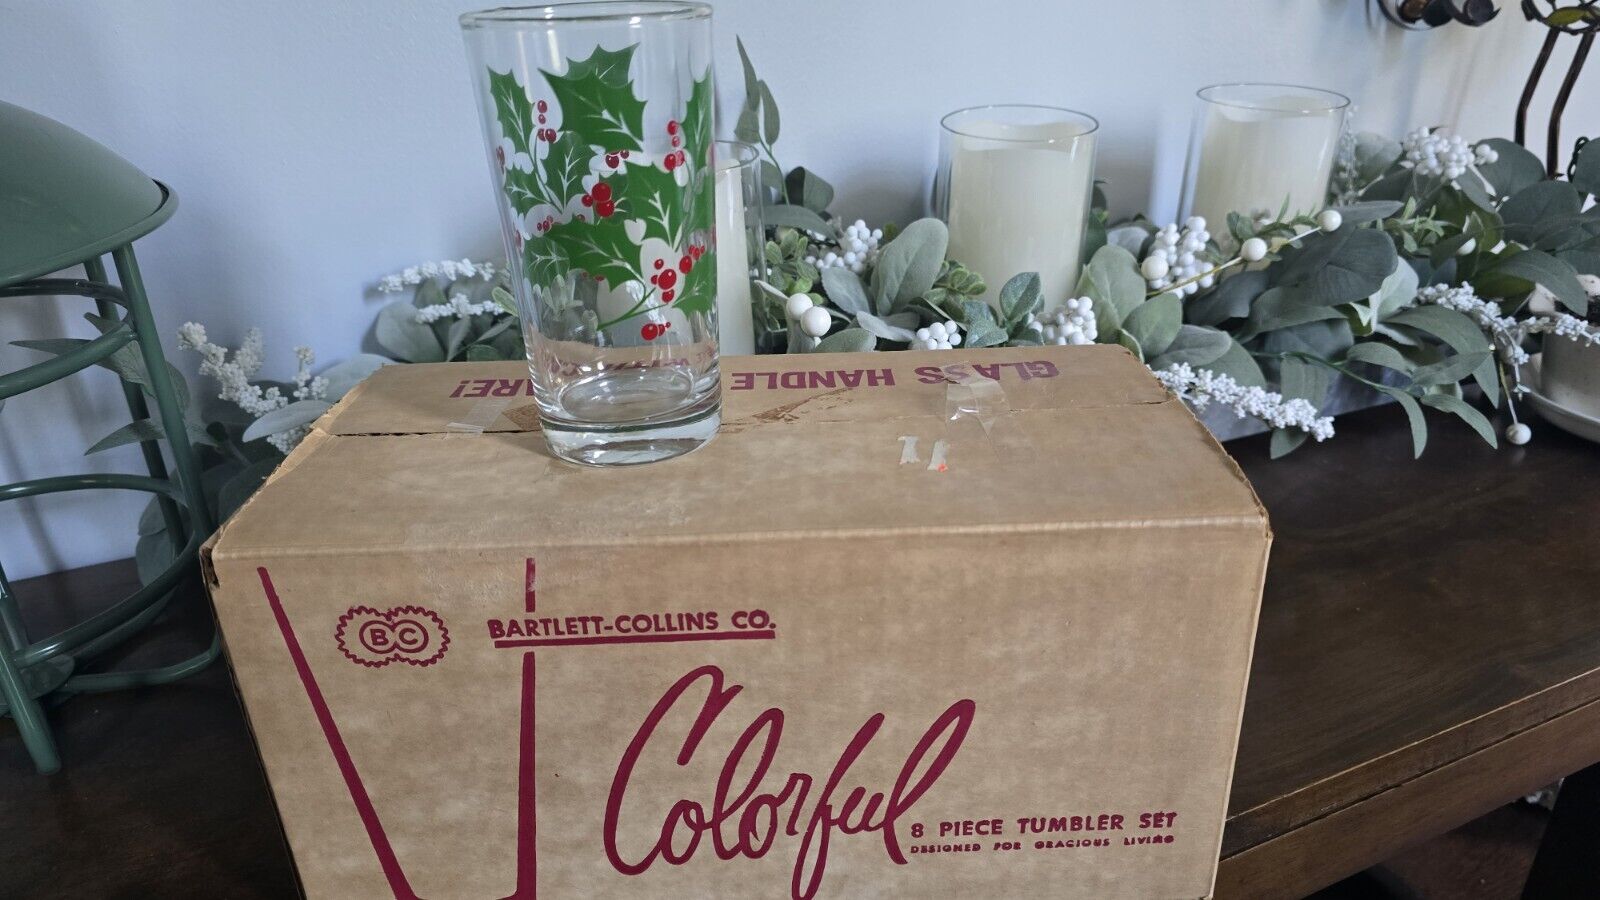 Vintage Bartlett-Collins Christmas Holly Tumblers - set of 8, in original box